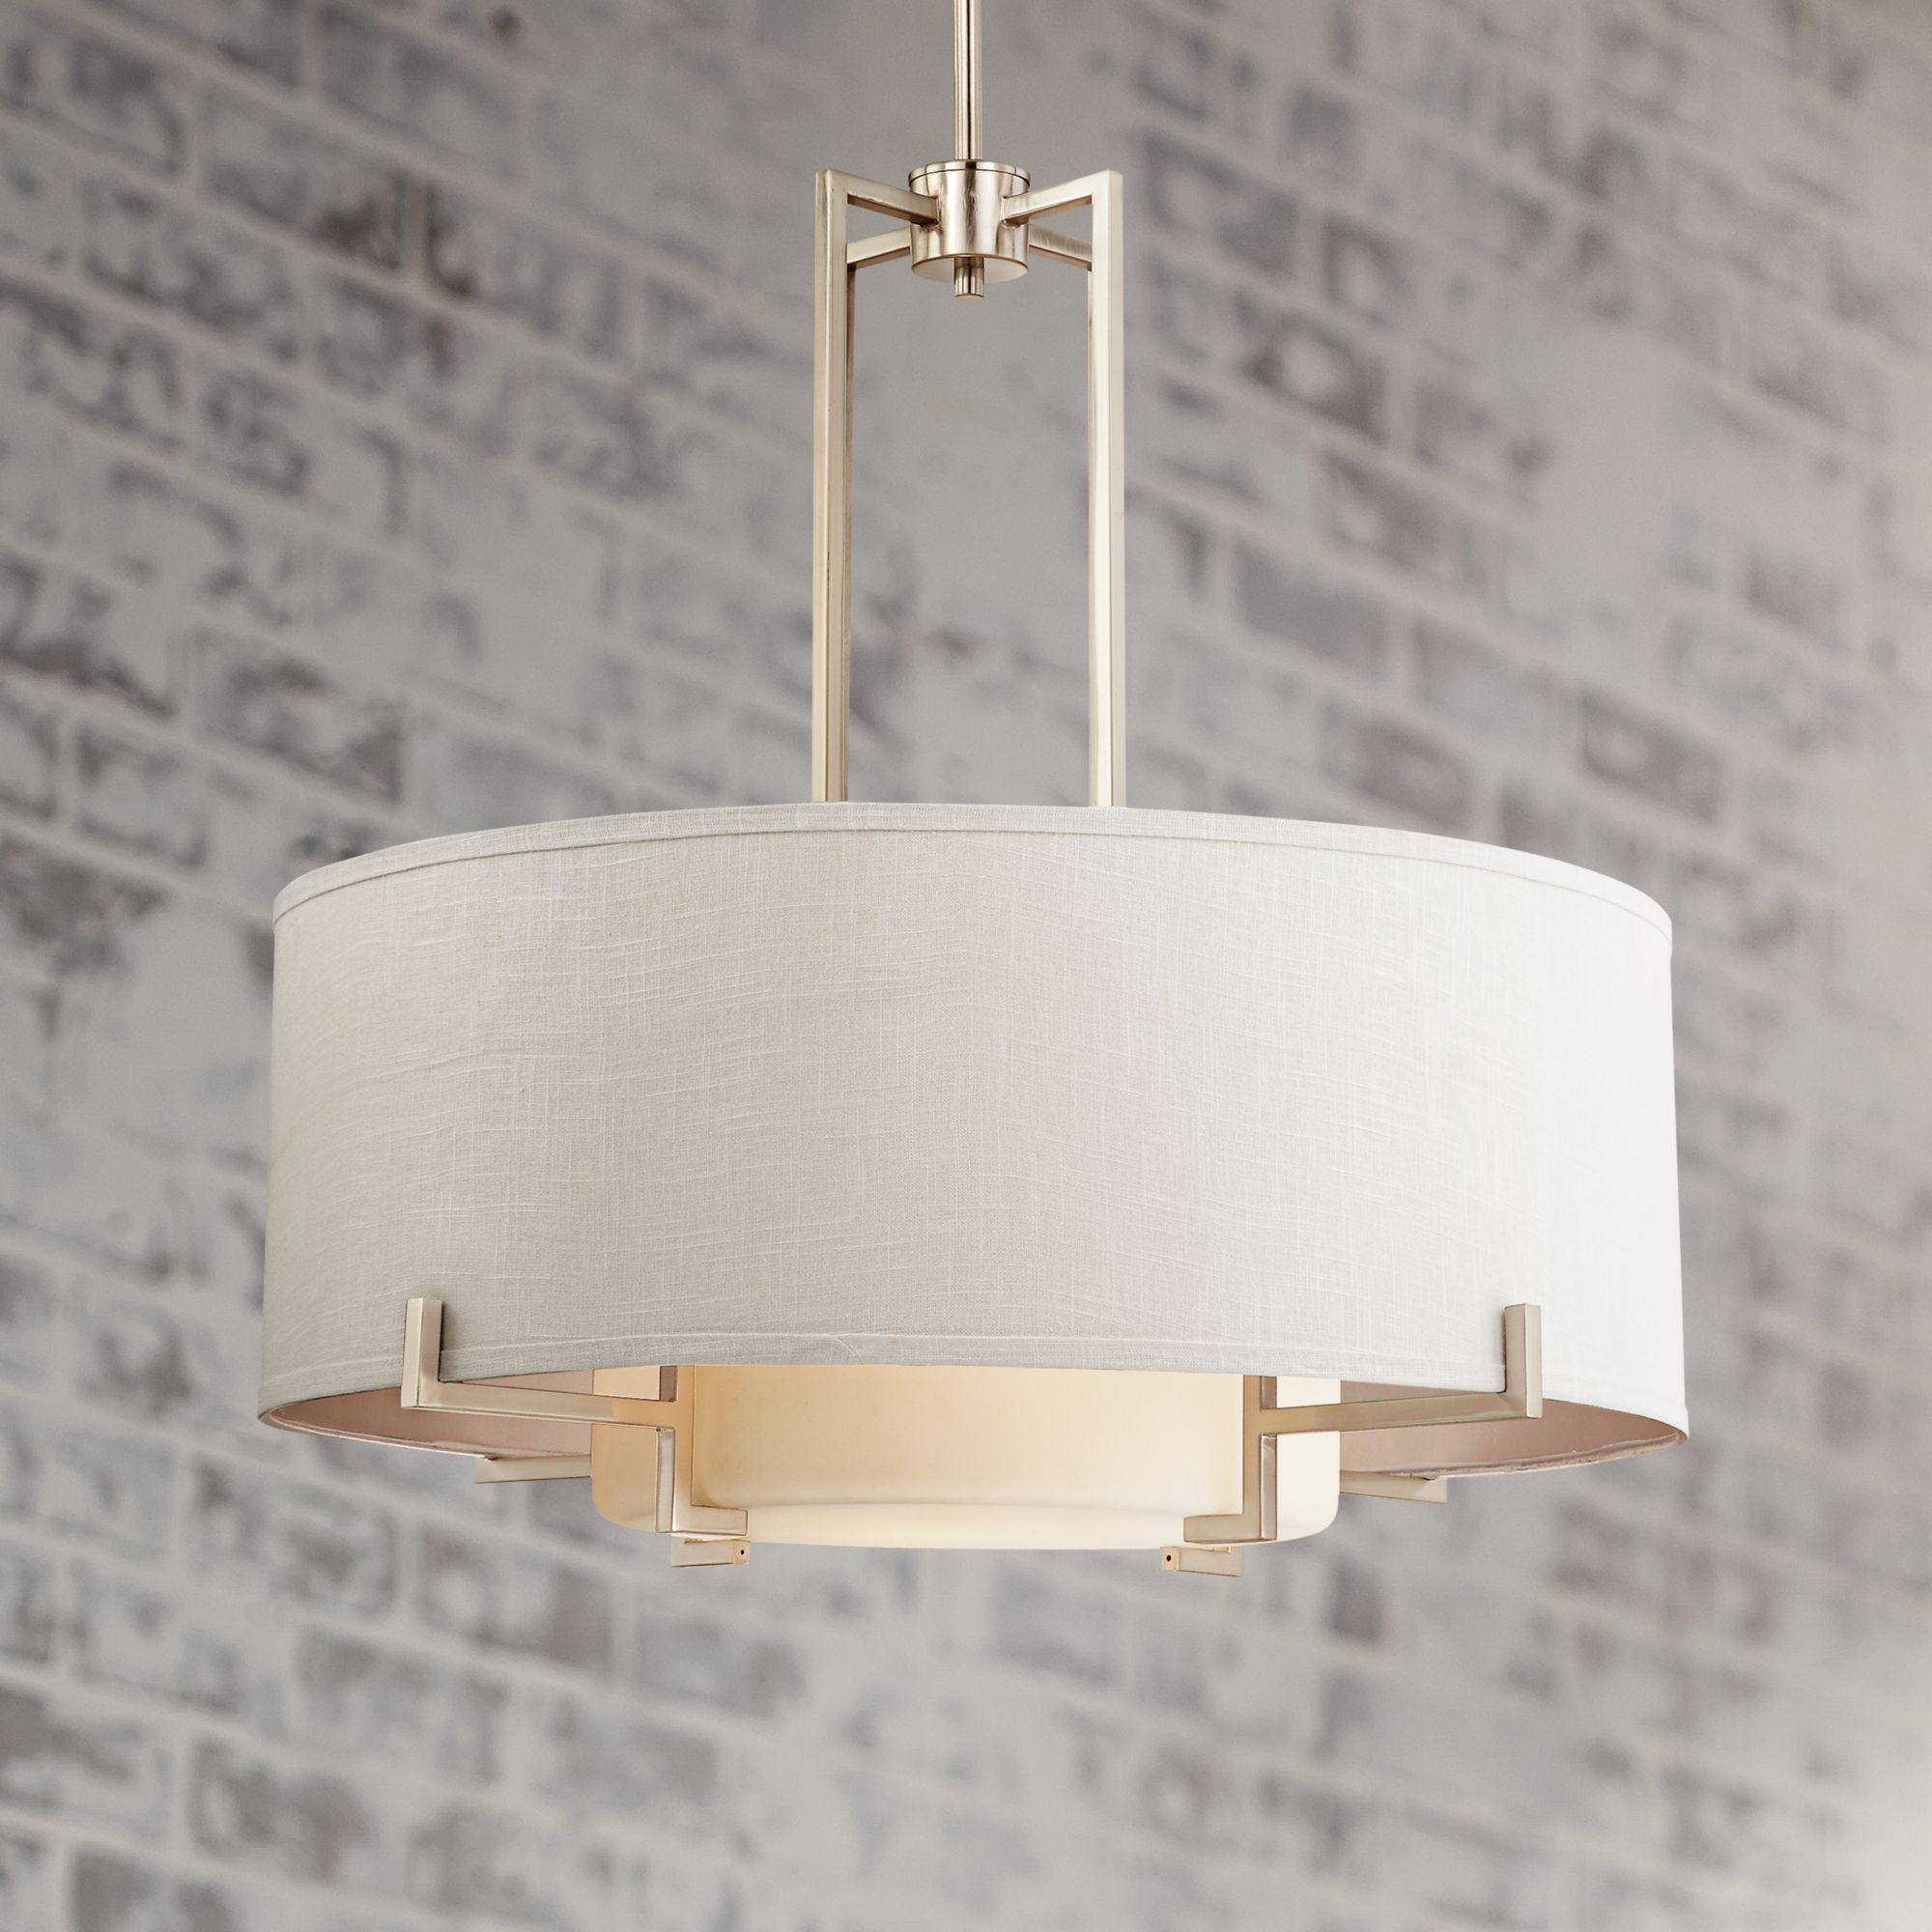 Possini Euro Design Brushed Nickel Pendant Chandelier 28 Throughout Polished Nickel And Crystal Modern Pendant Lights (View 15 of 15)